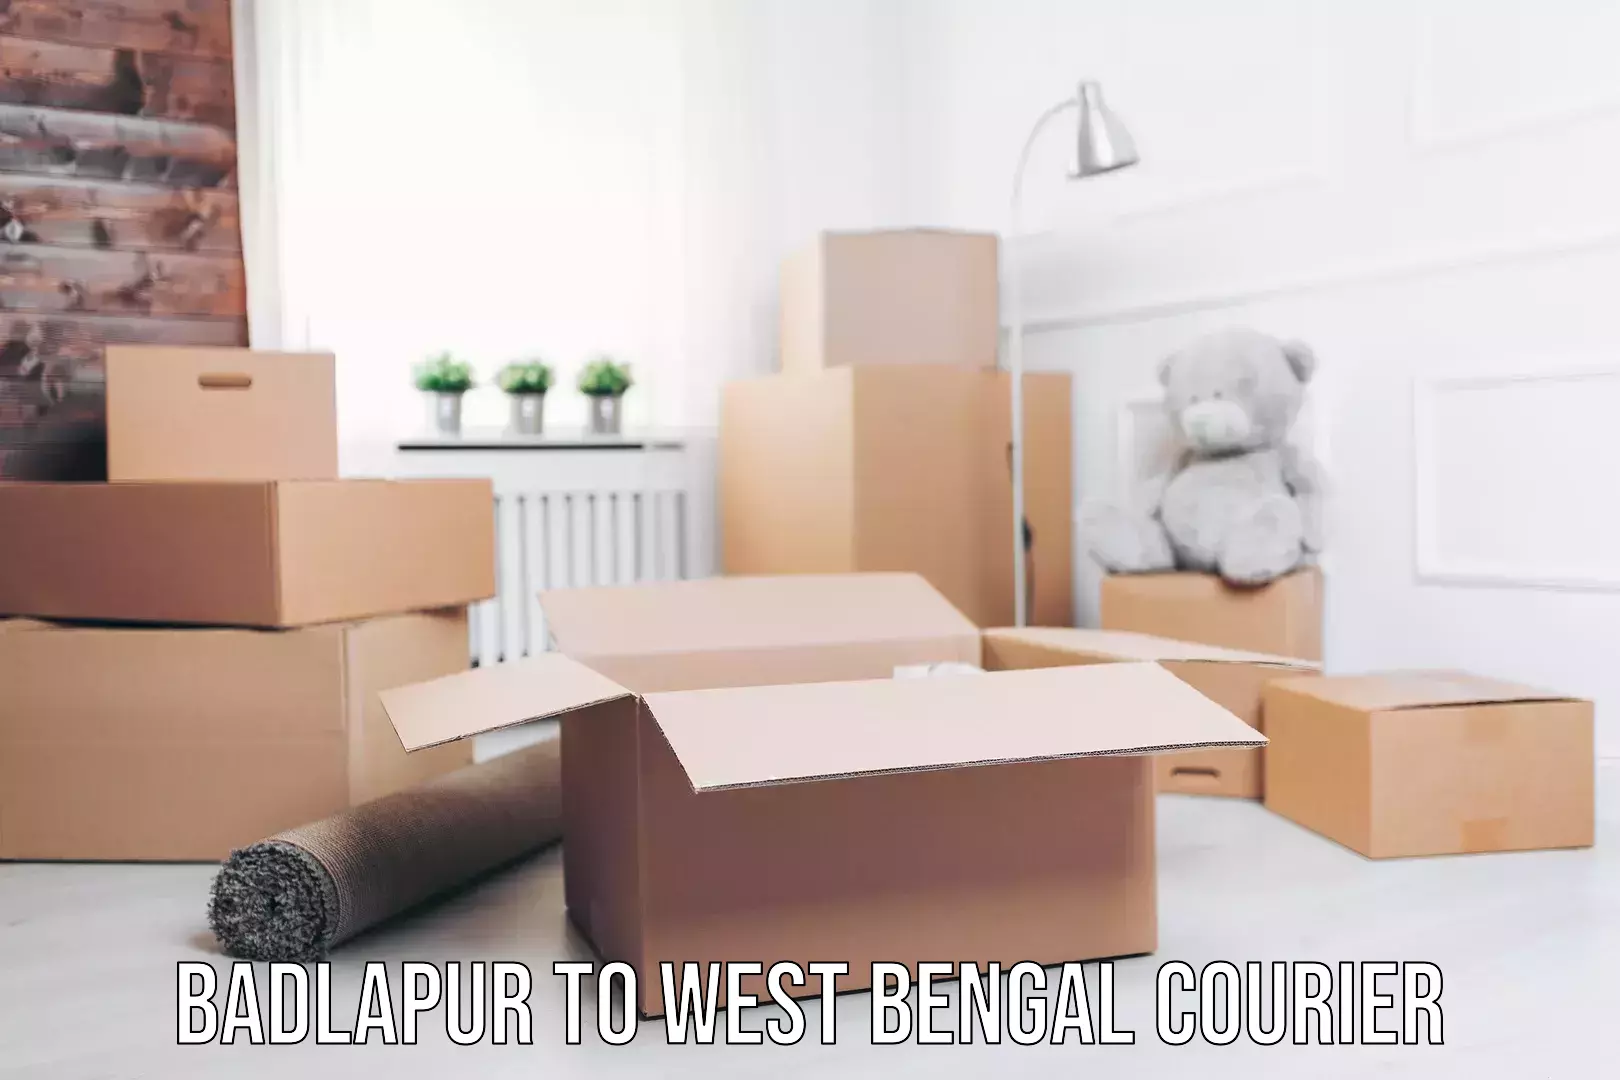 Delivery service partnership Badlapur to West Bengal